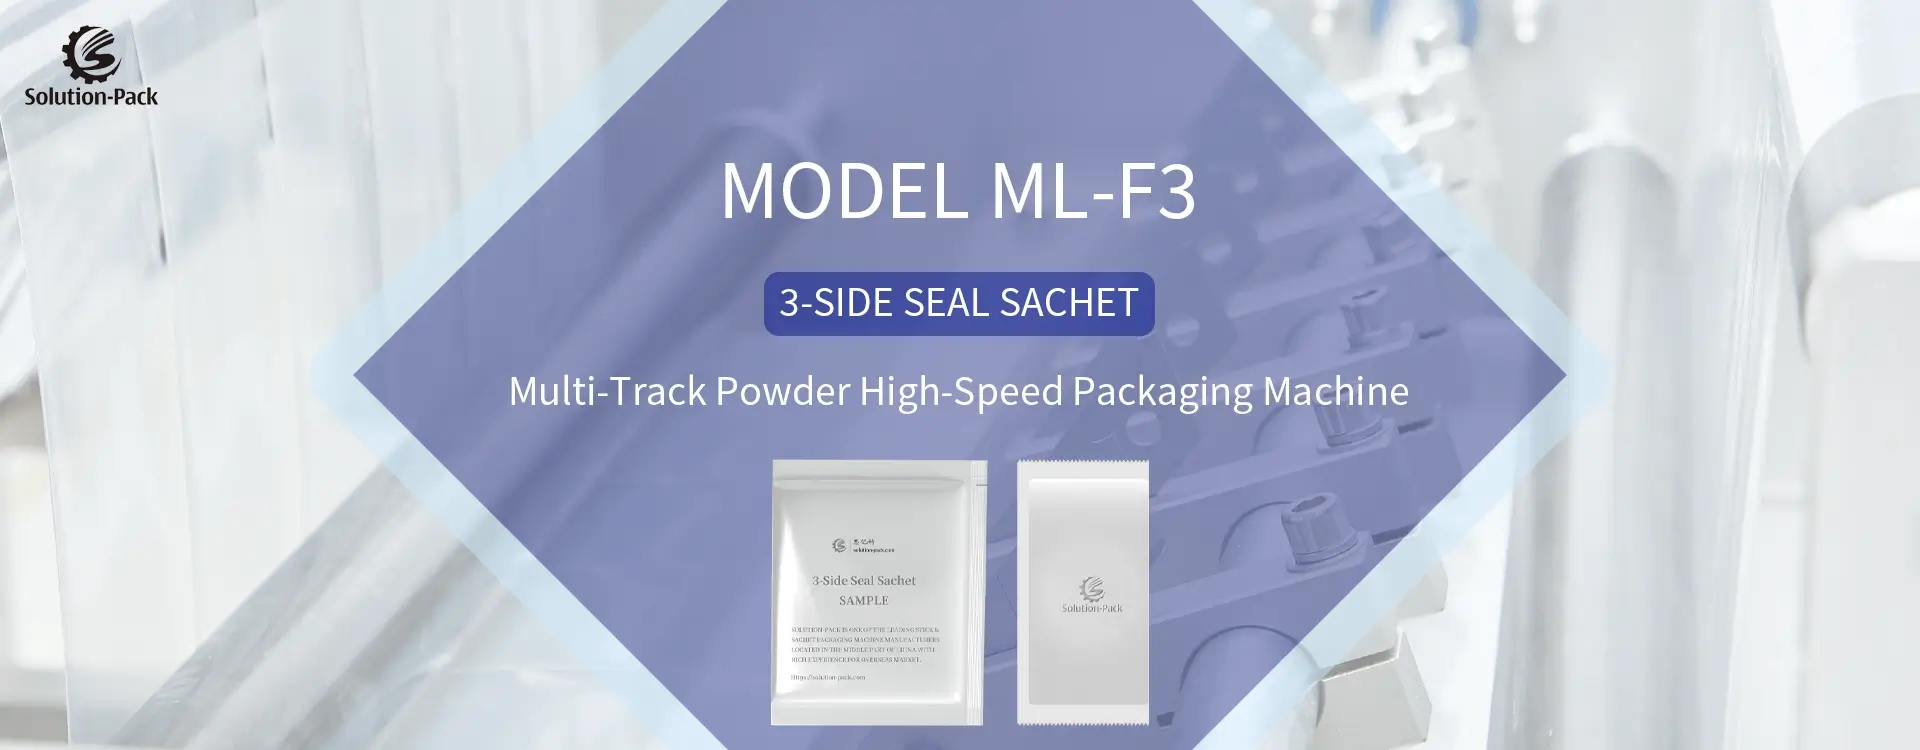 Model ML-F3 Automatic High-Speed Multi-Track Powder 3-Side Seal Sachet Packaging Machine Unit Heading Banner Picture | Solution-Pack